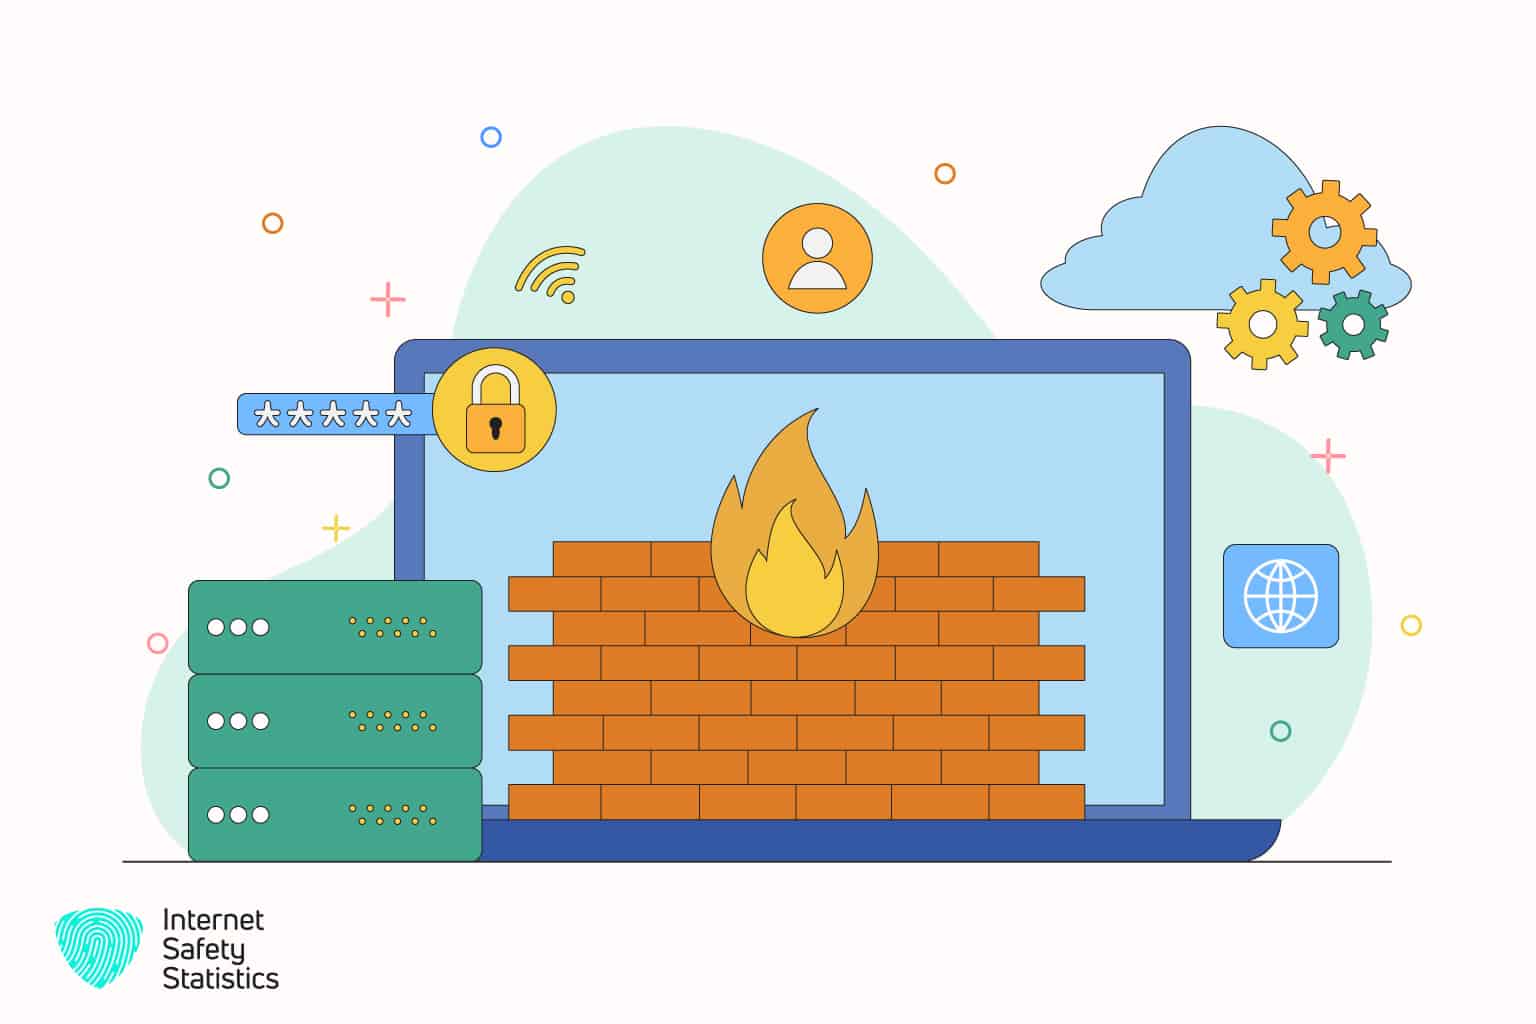 Software Firewall Vs. Hardware Firewall: Which One Should You Choose?